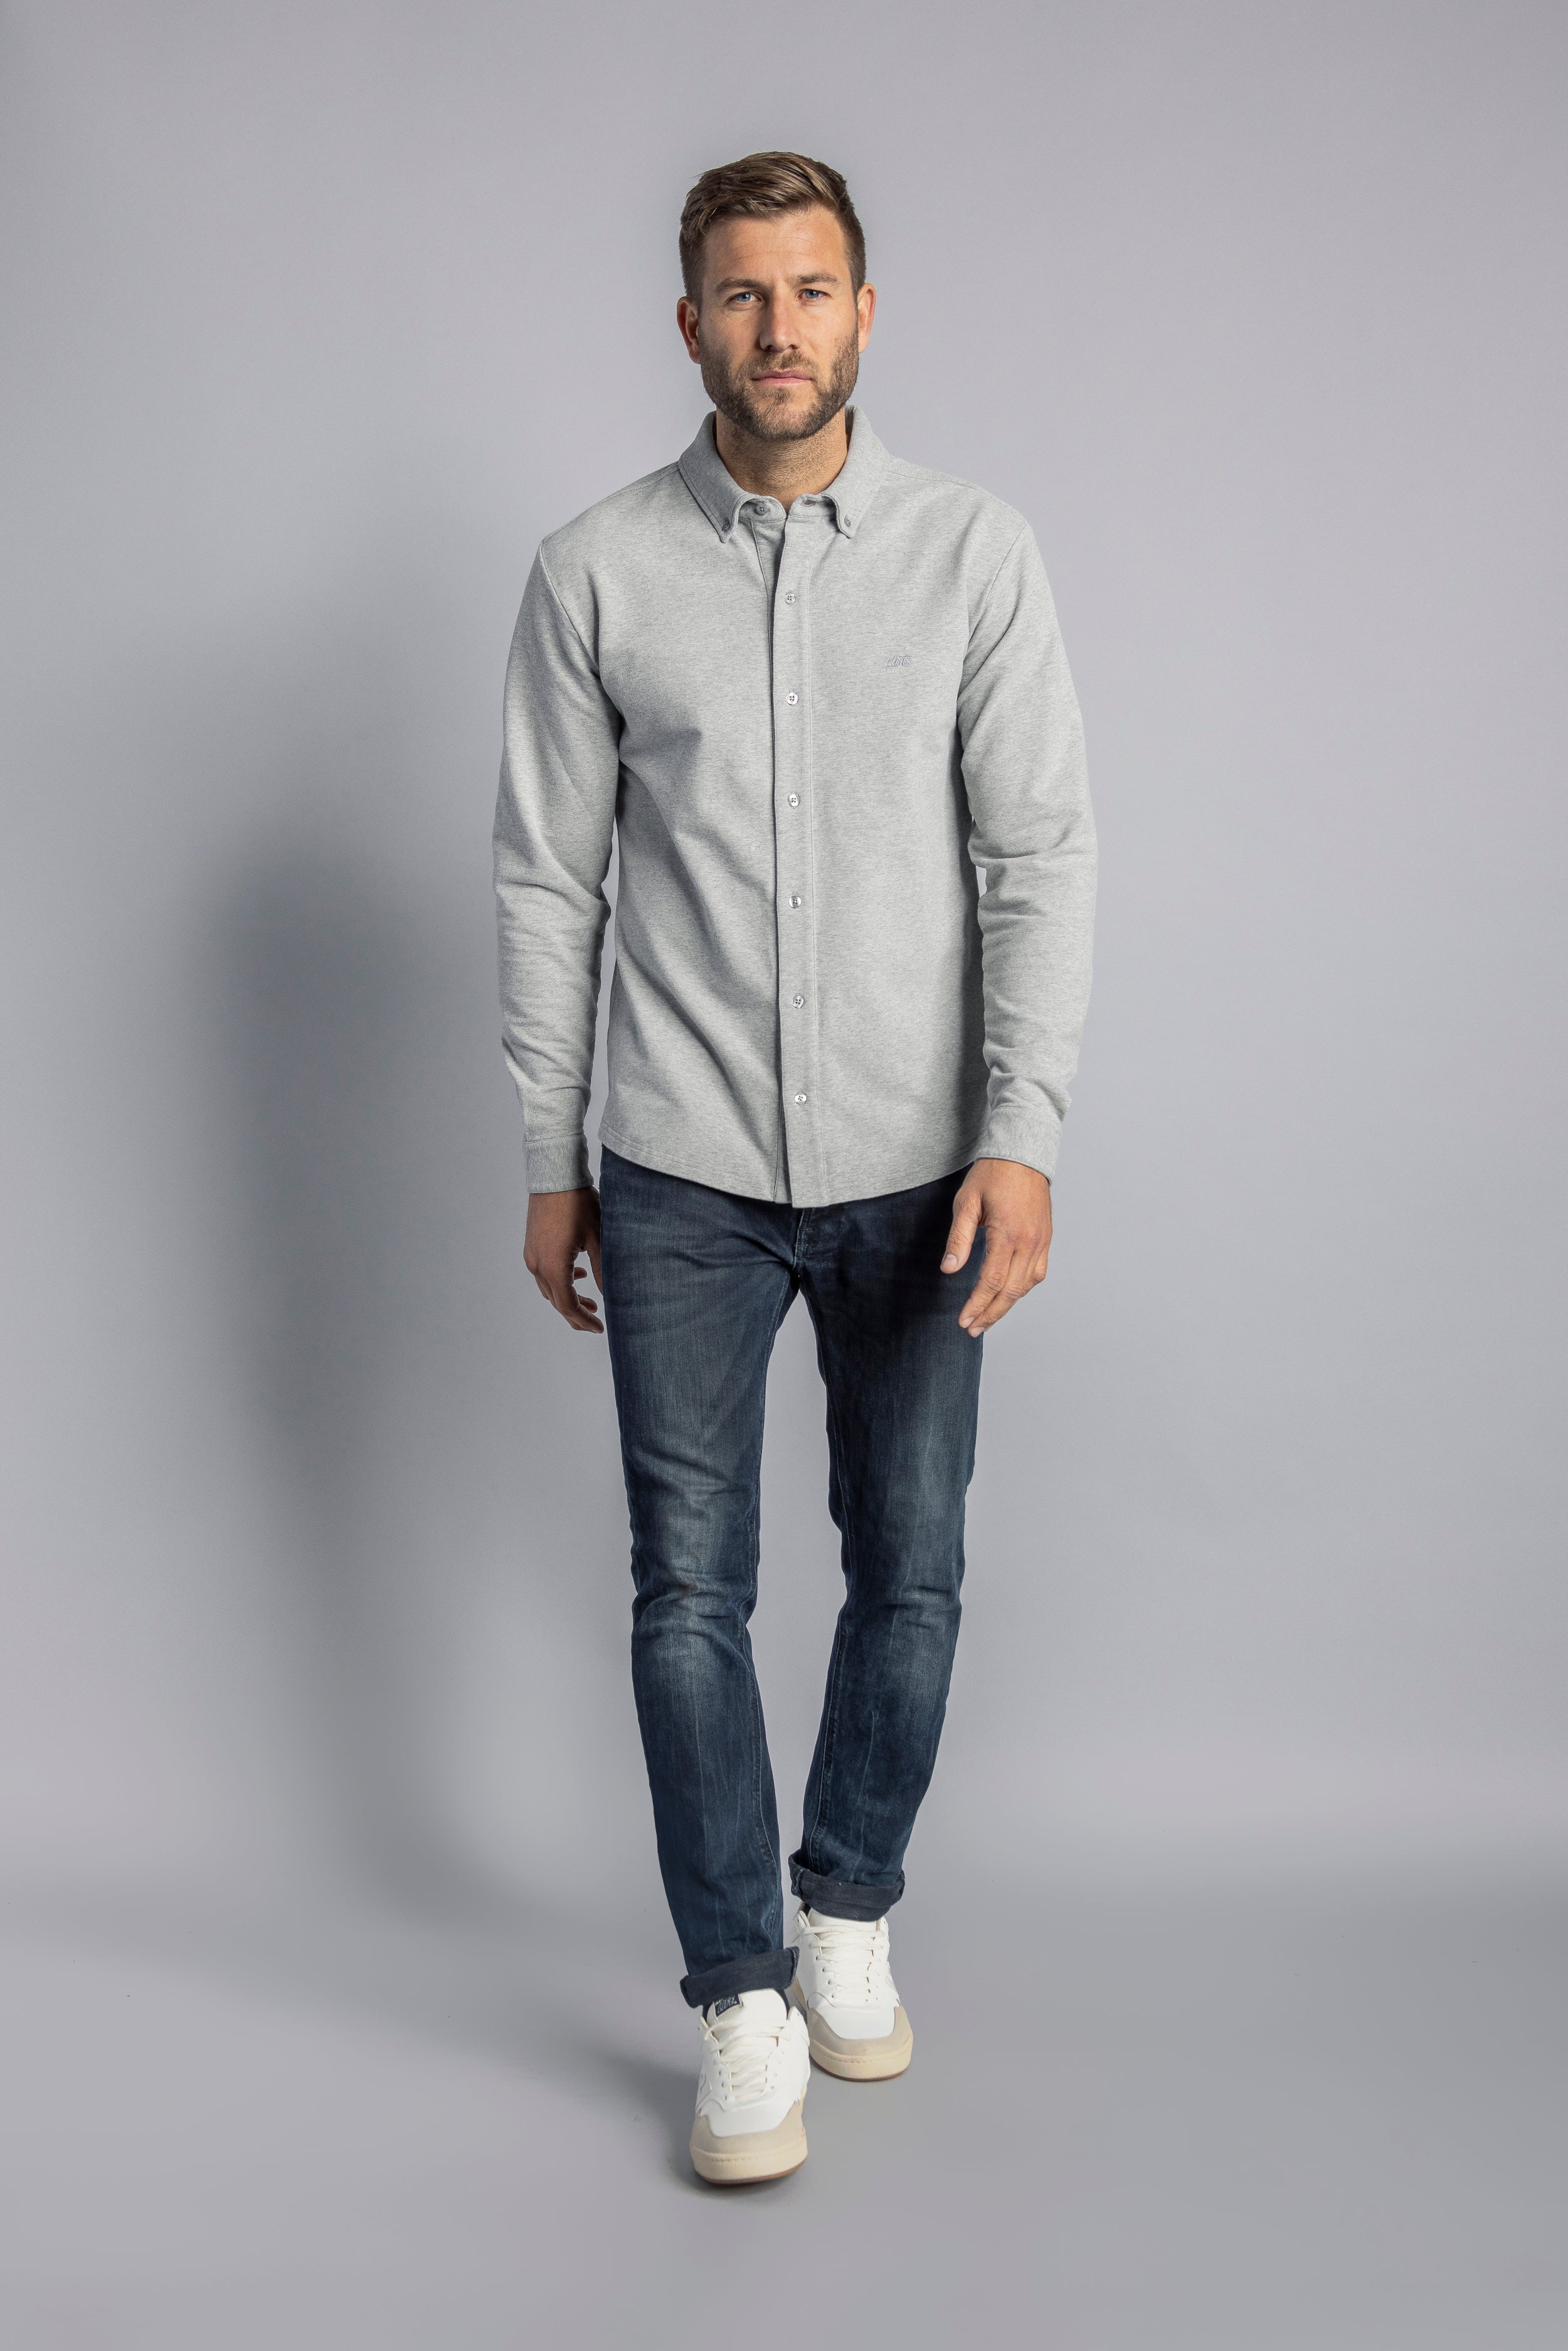 Gray, long-sleeved shirt Organic Jersey made from organic cotton by DIRTS